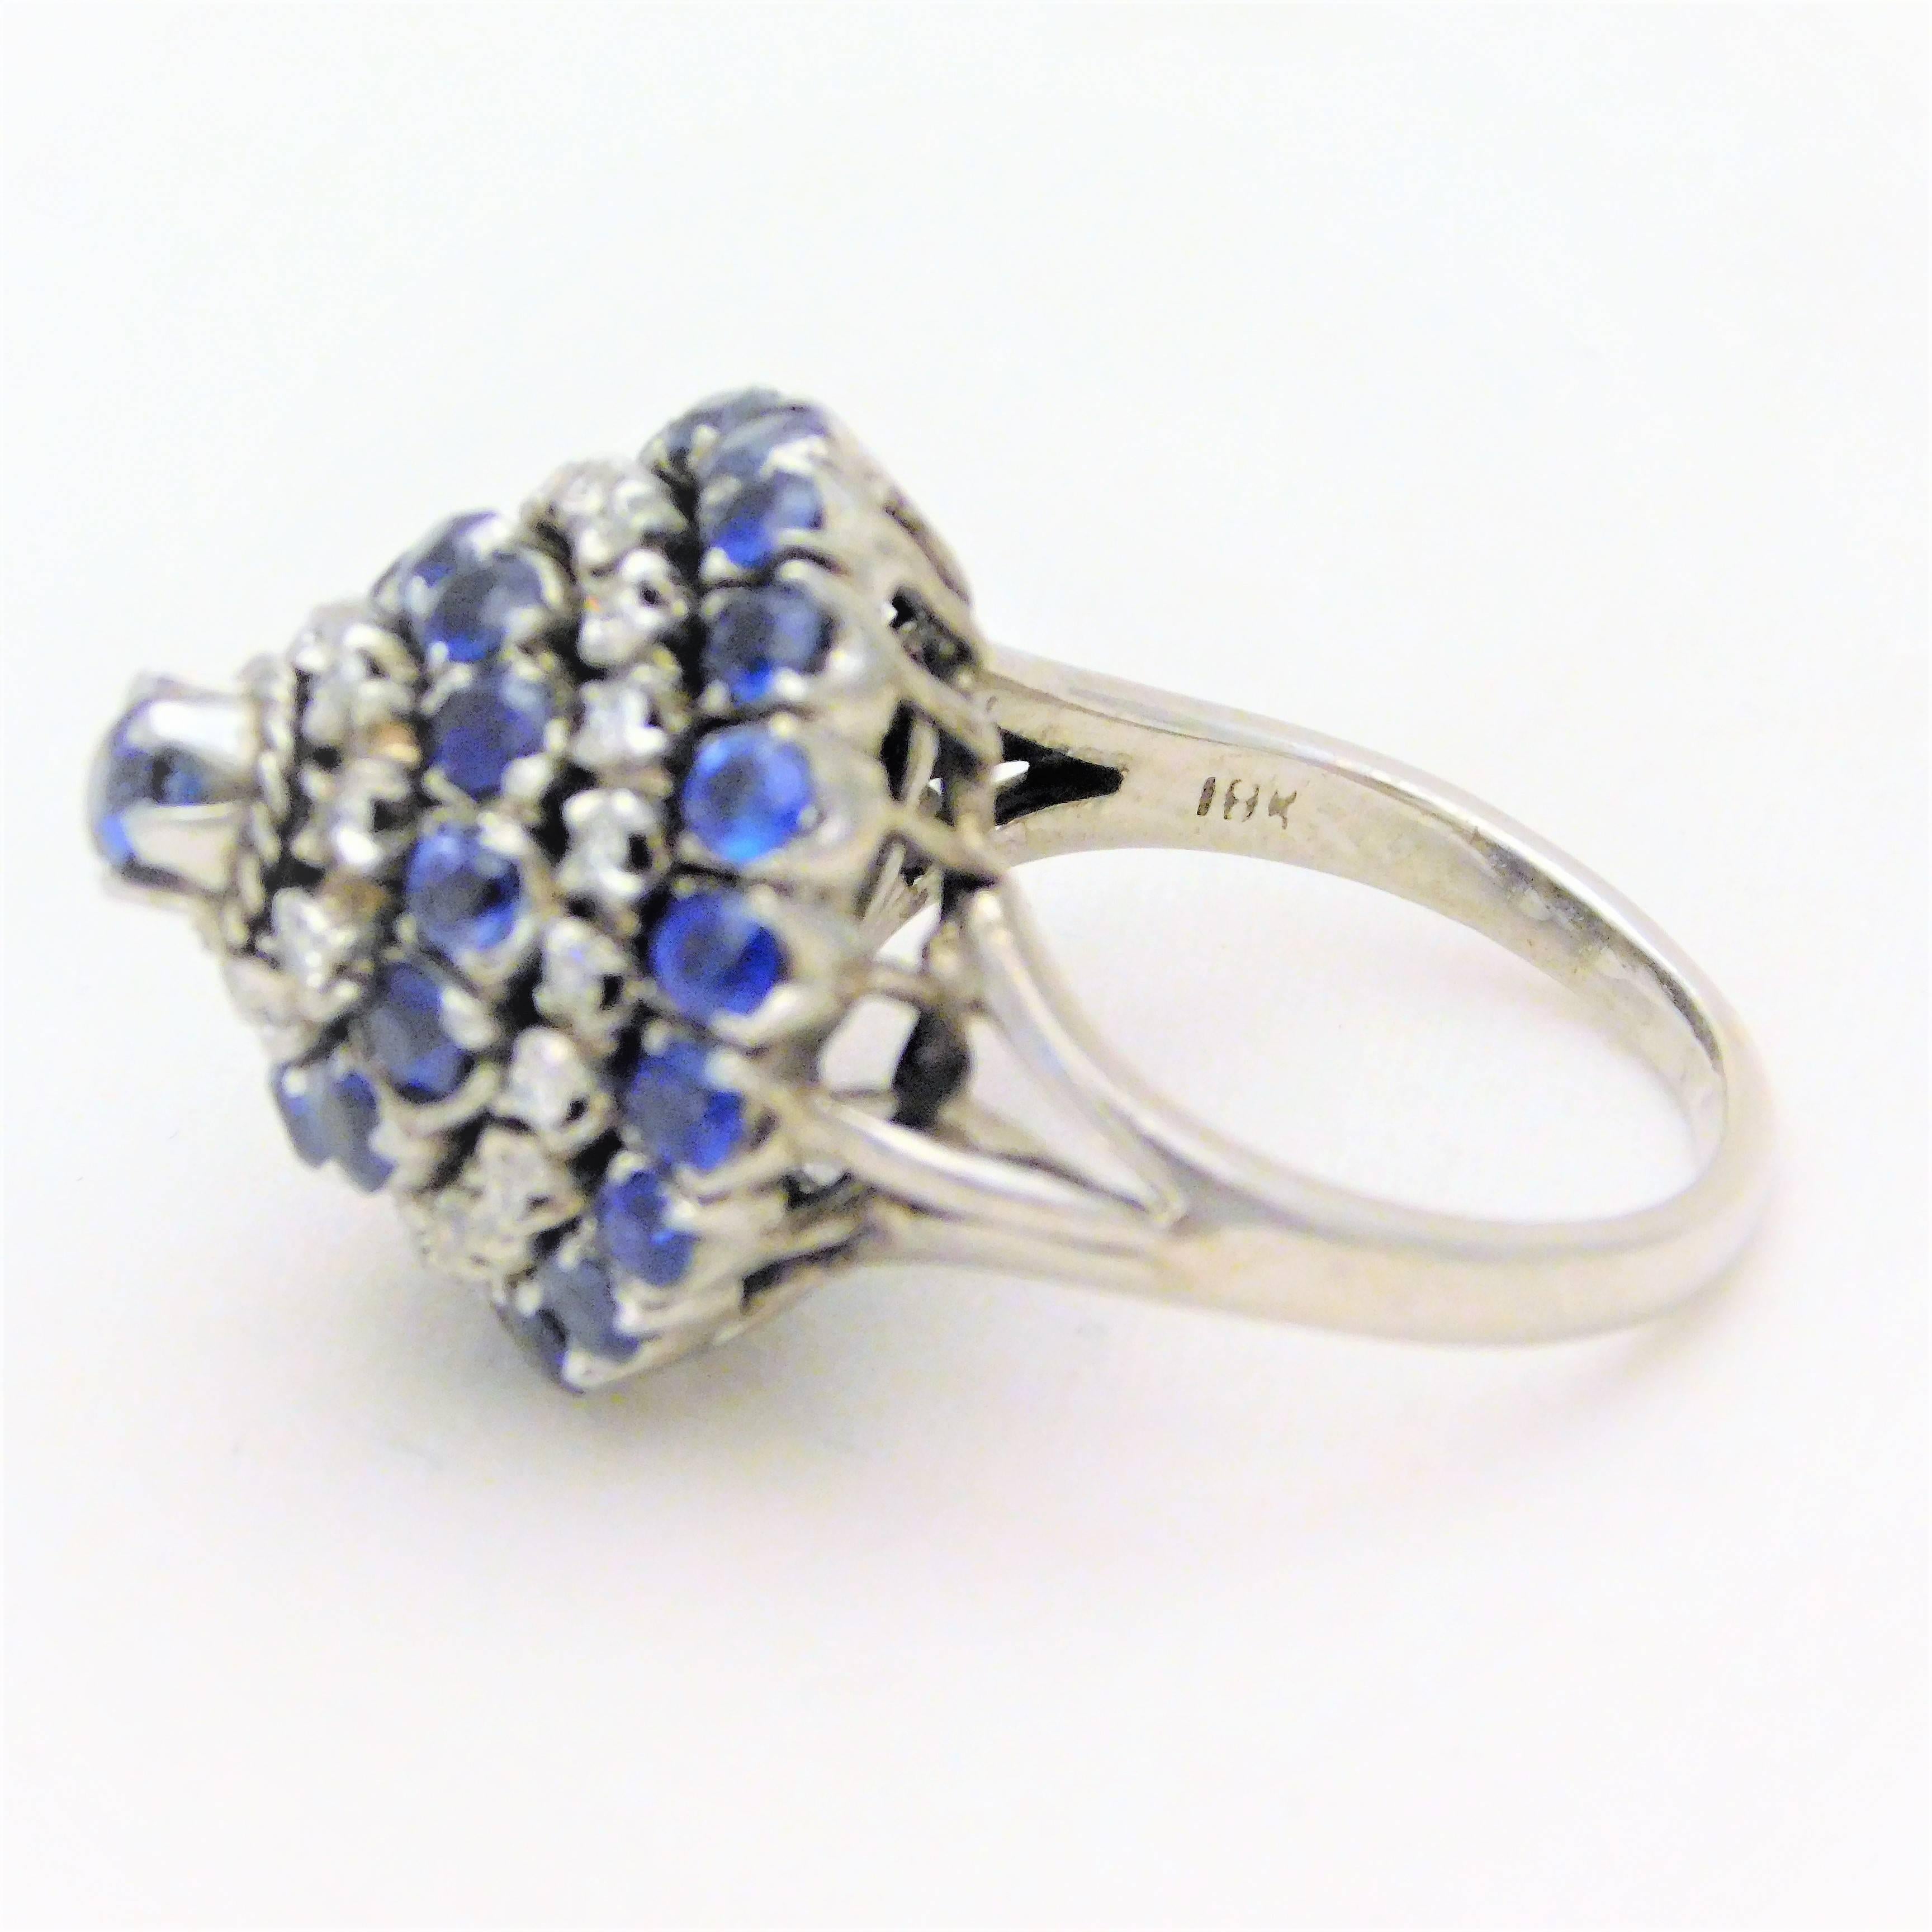 Midcentury Diamond and Sapphire Spinning Dome Ring, circa 1943 For Sale 3